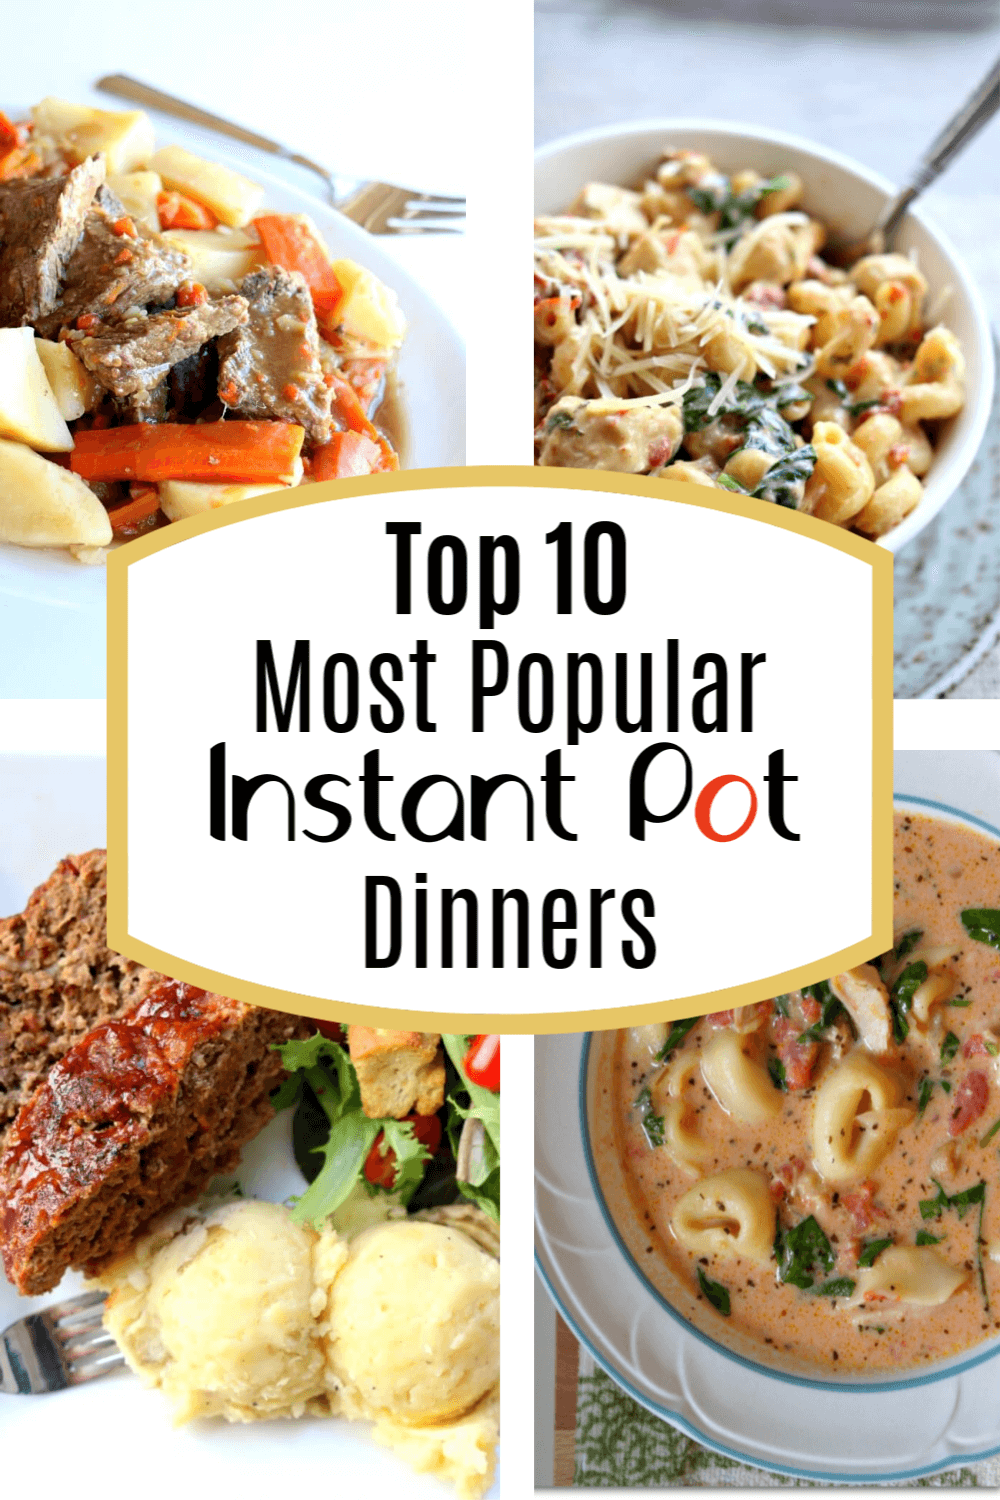 Top 10 Most Popular Instant Pot Dinner Recipes - 365 Days of Slow Cooking and Pressure Cooking